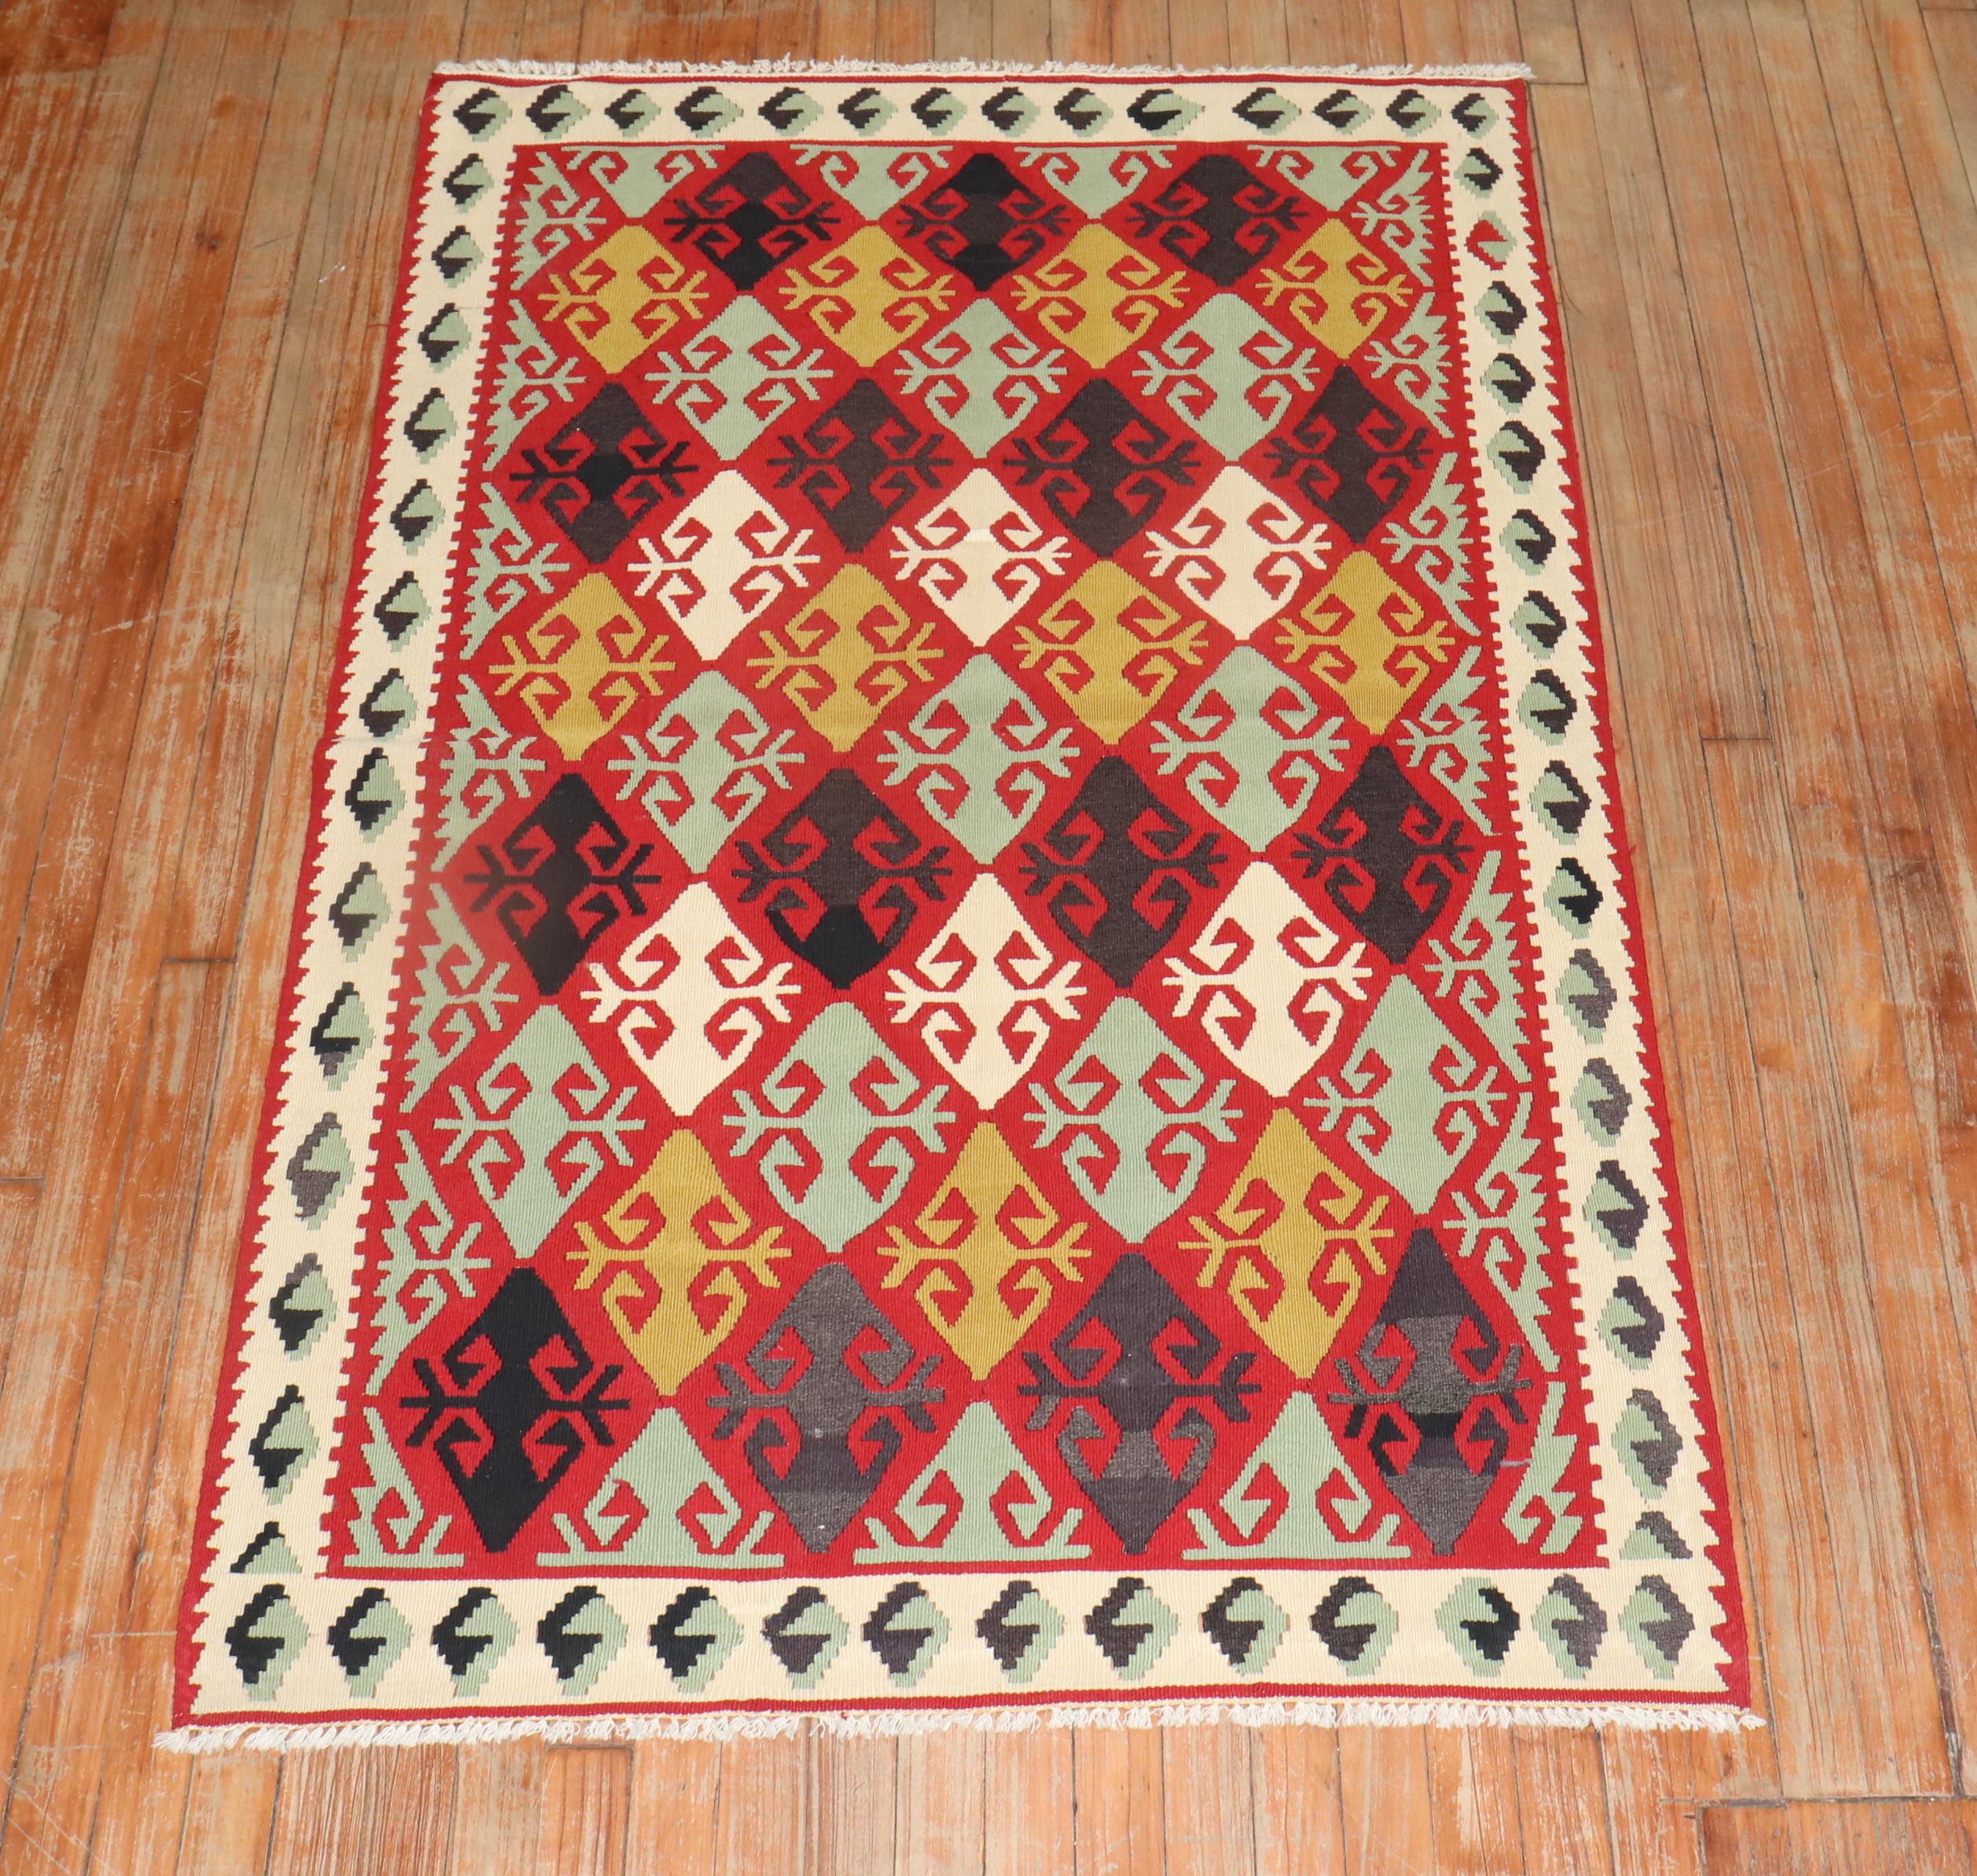 Mid 20th century Turkish Kilim with a colorful Geometric Pattern in great condition

Measures: 3'6'' x 5'6''.